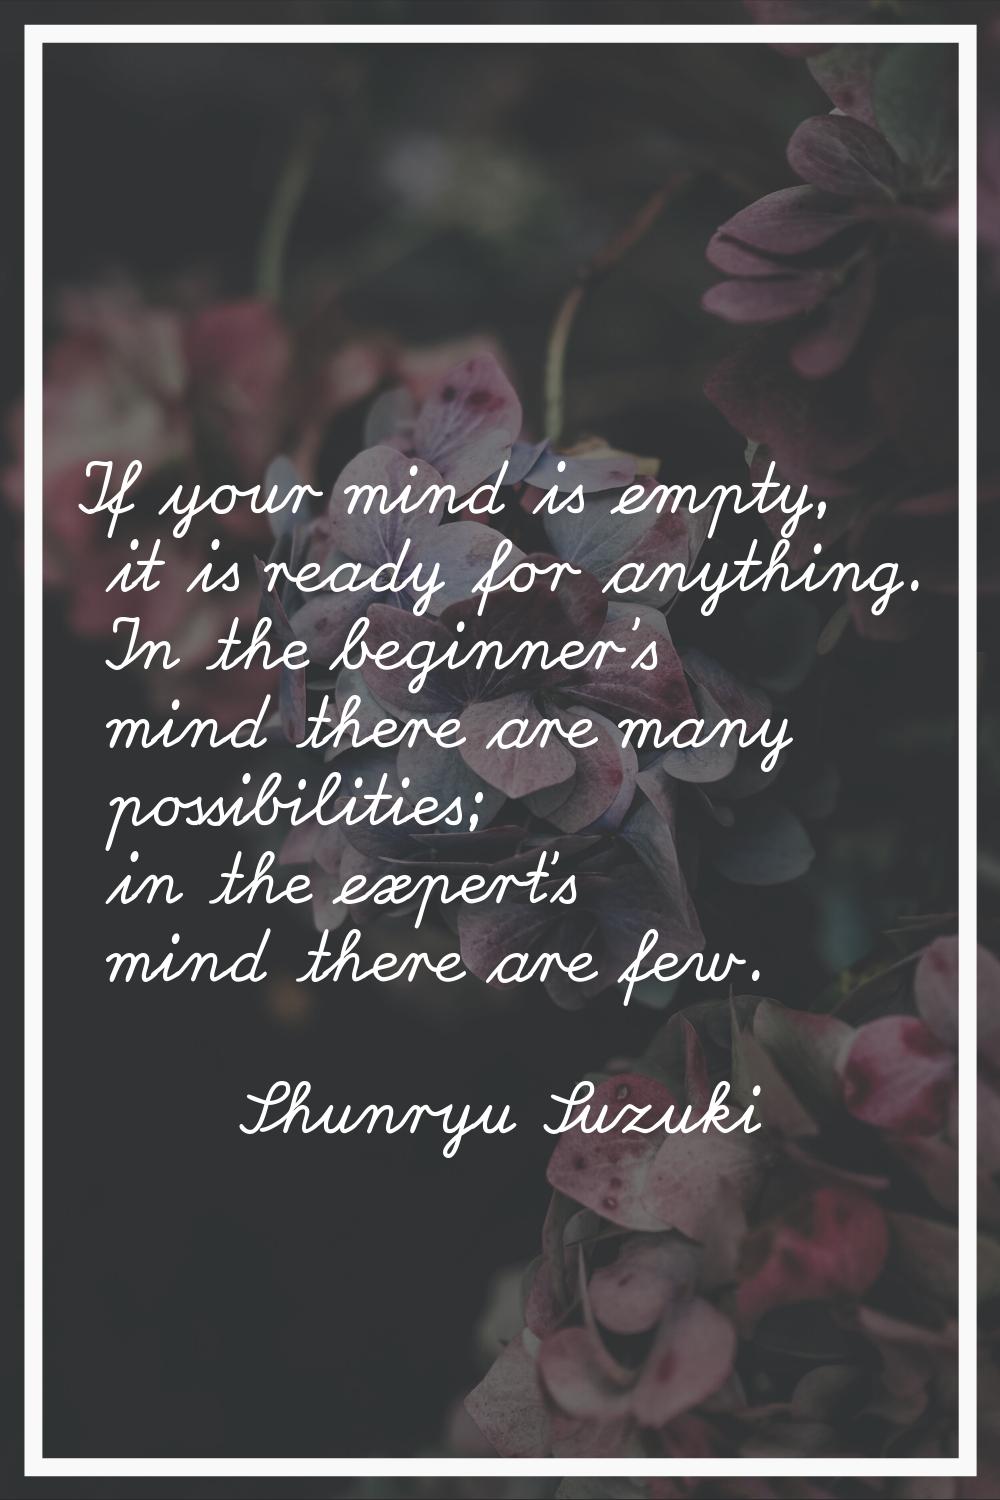 If your mind is empty, it is ready for anything. In the beginner's mind there are many possibilitie